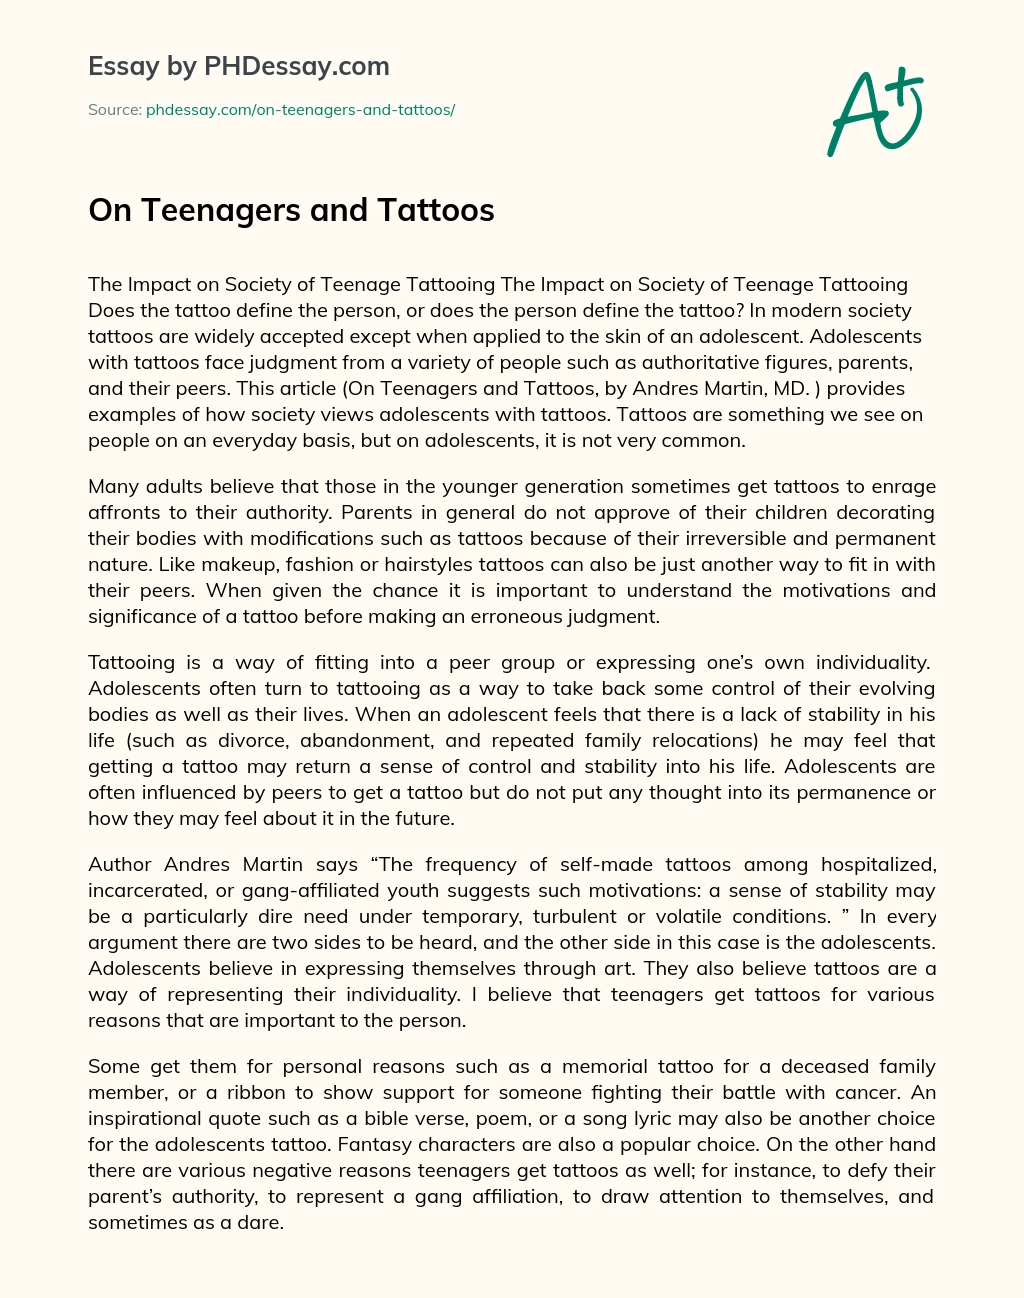 The Impact on Society of Teenage Tattooing essay